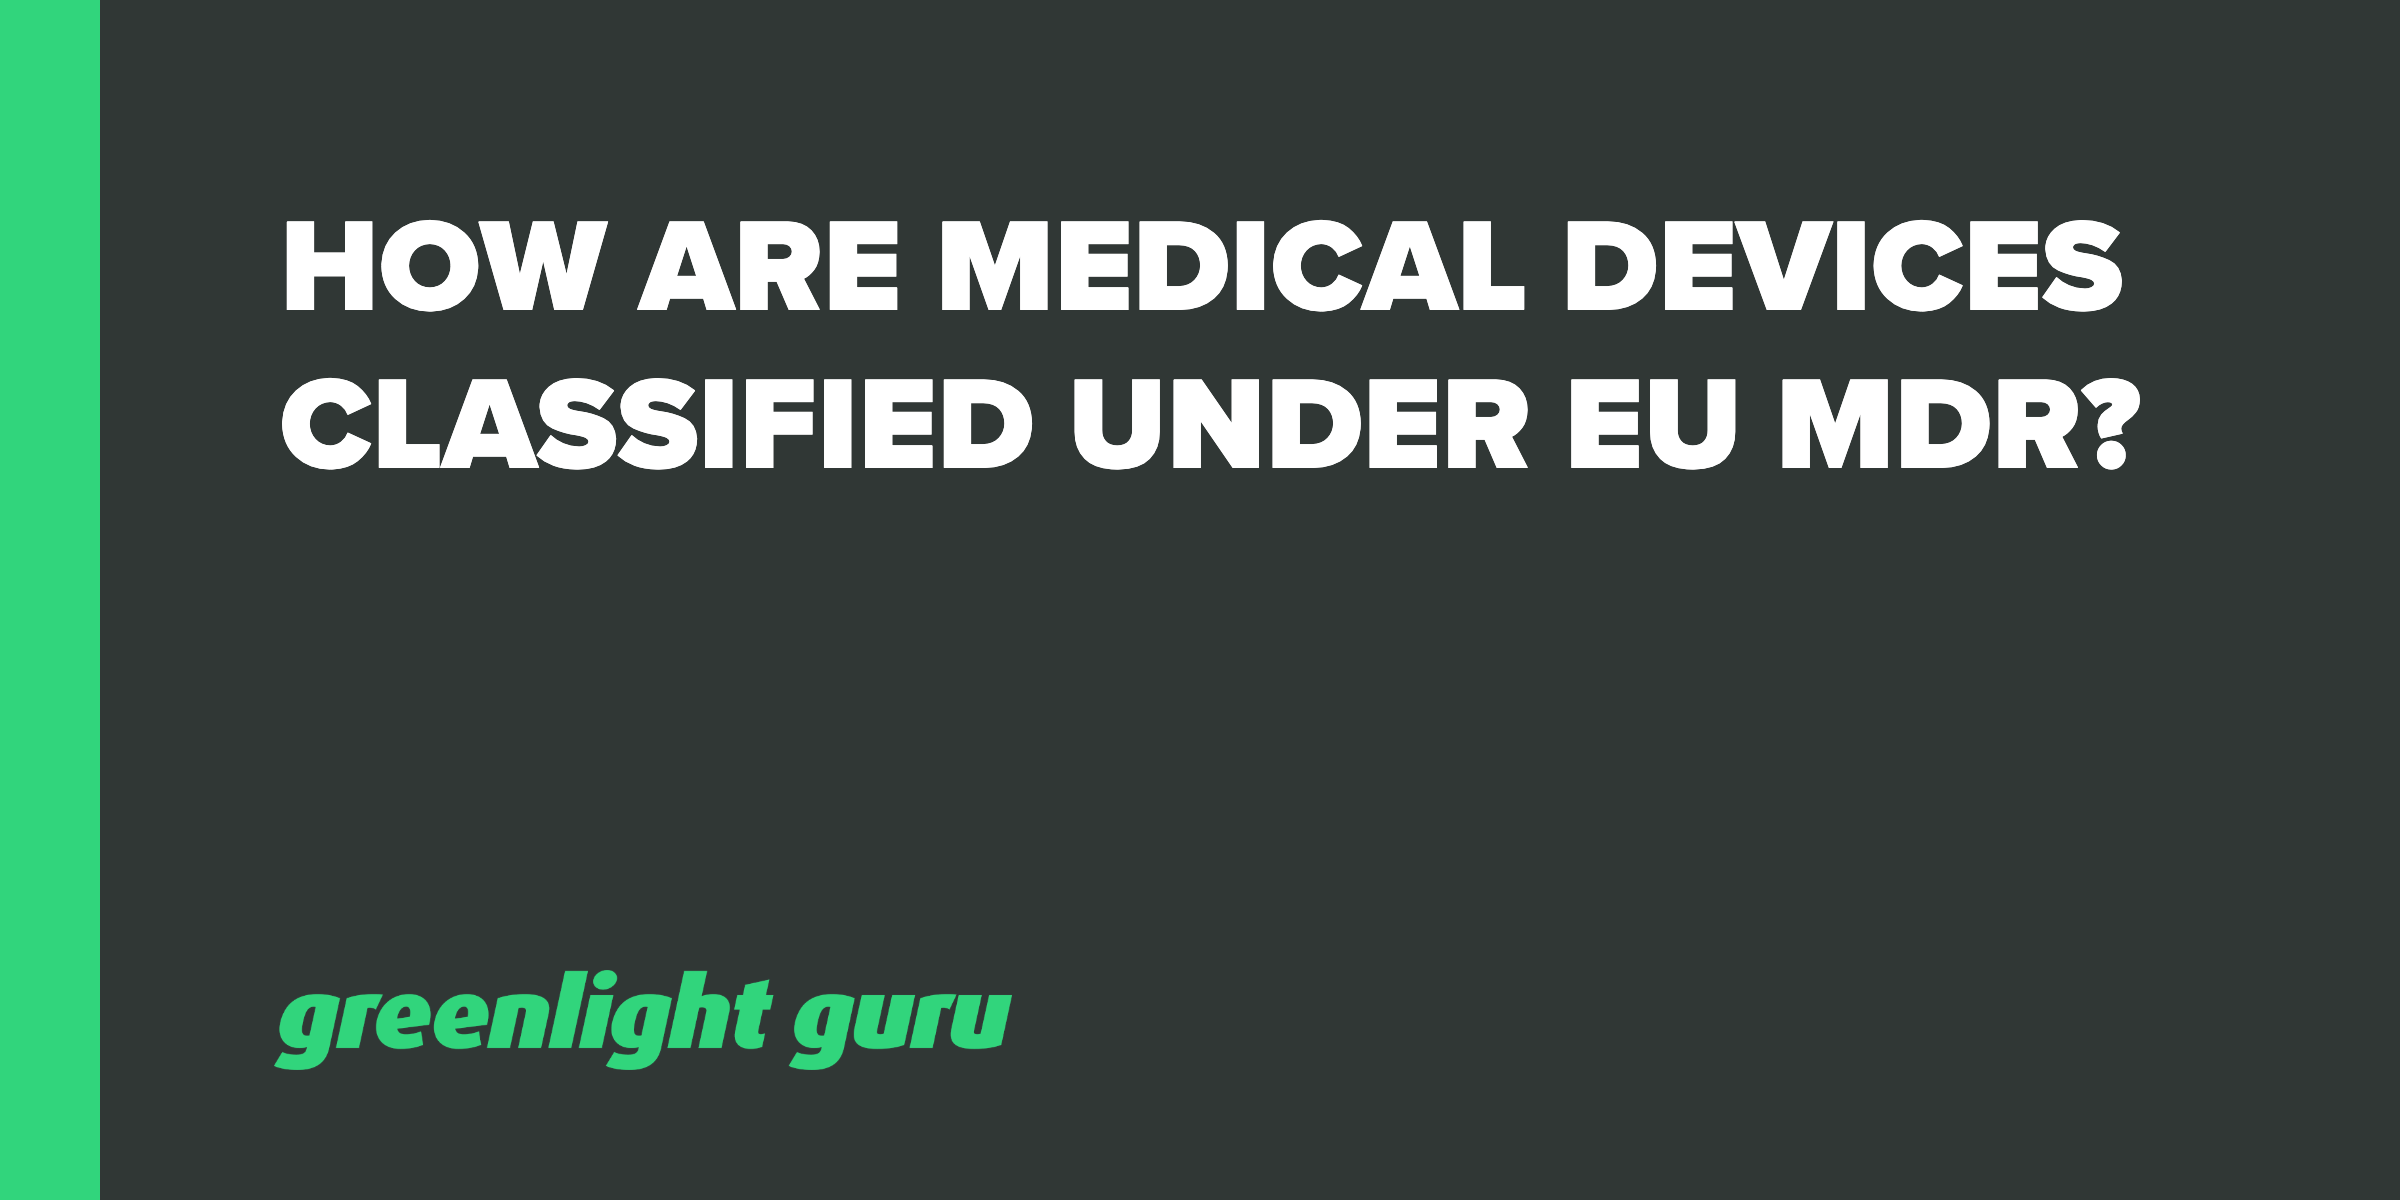 How are Medical Devices Classified under EU MDR?